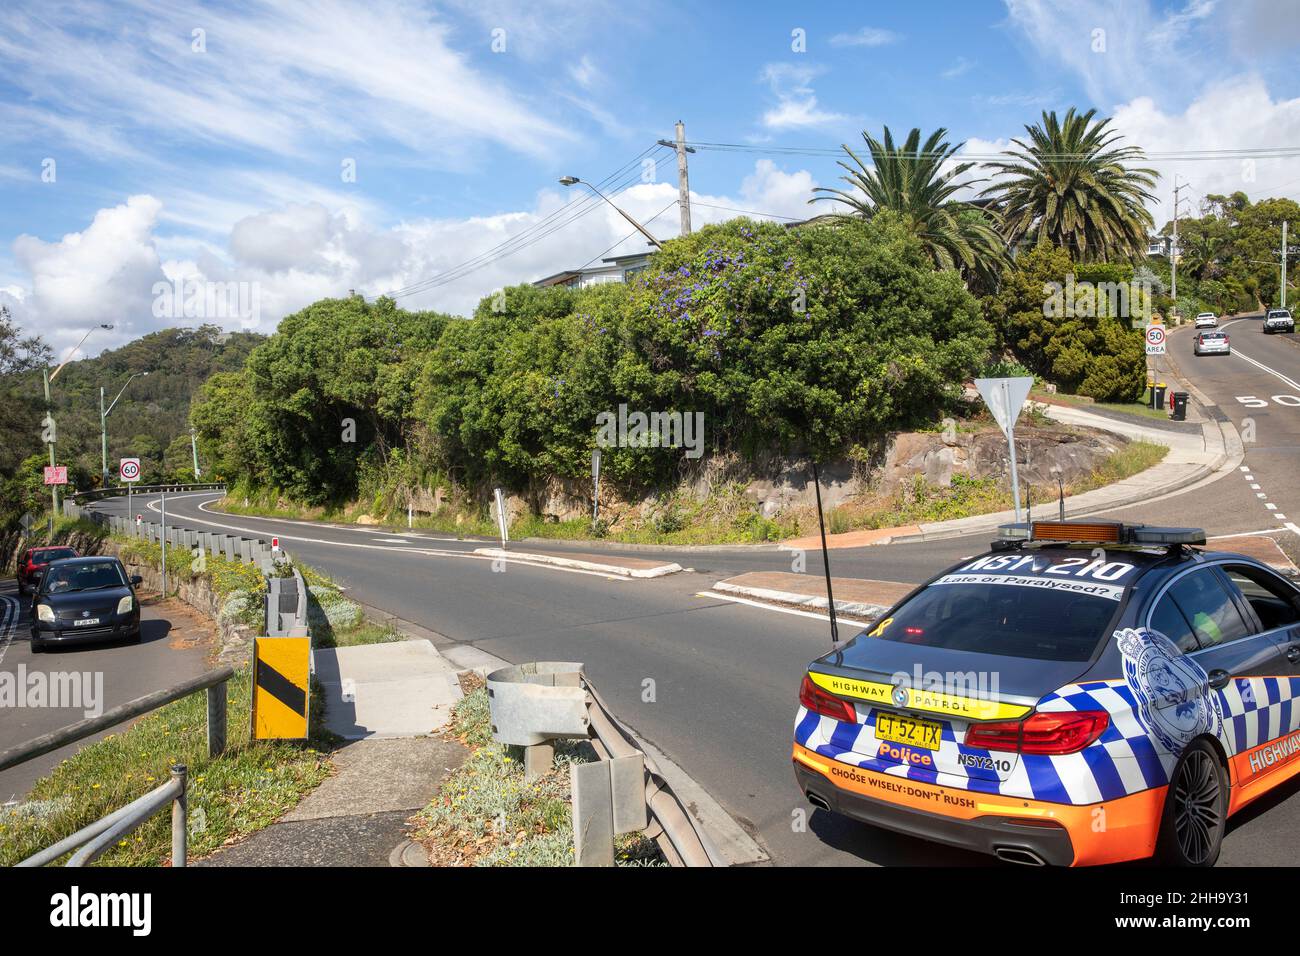 NSW Police highway patrol car blocks a road off the bilgola bends roundabout due to a serious traffic incident,Avalon,Sydney,Australia Stock Photo